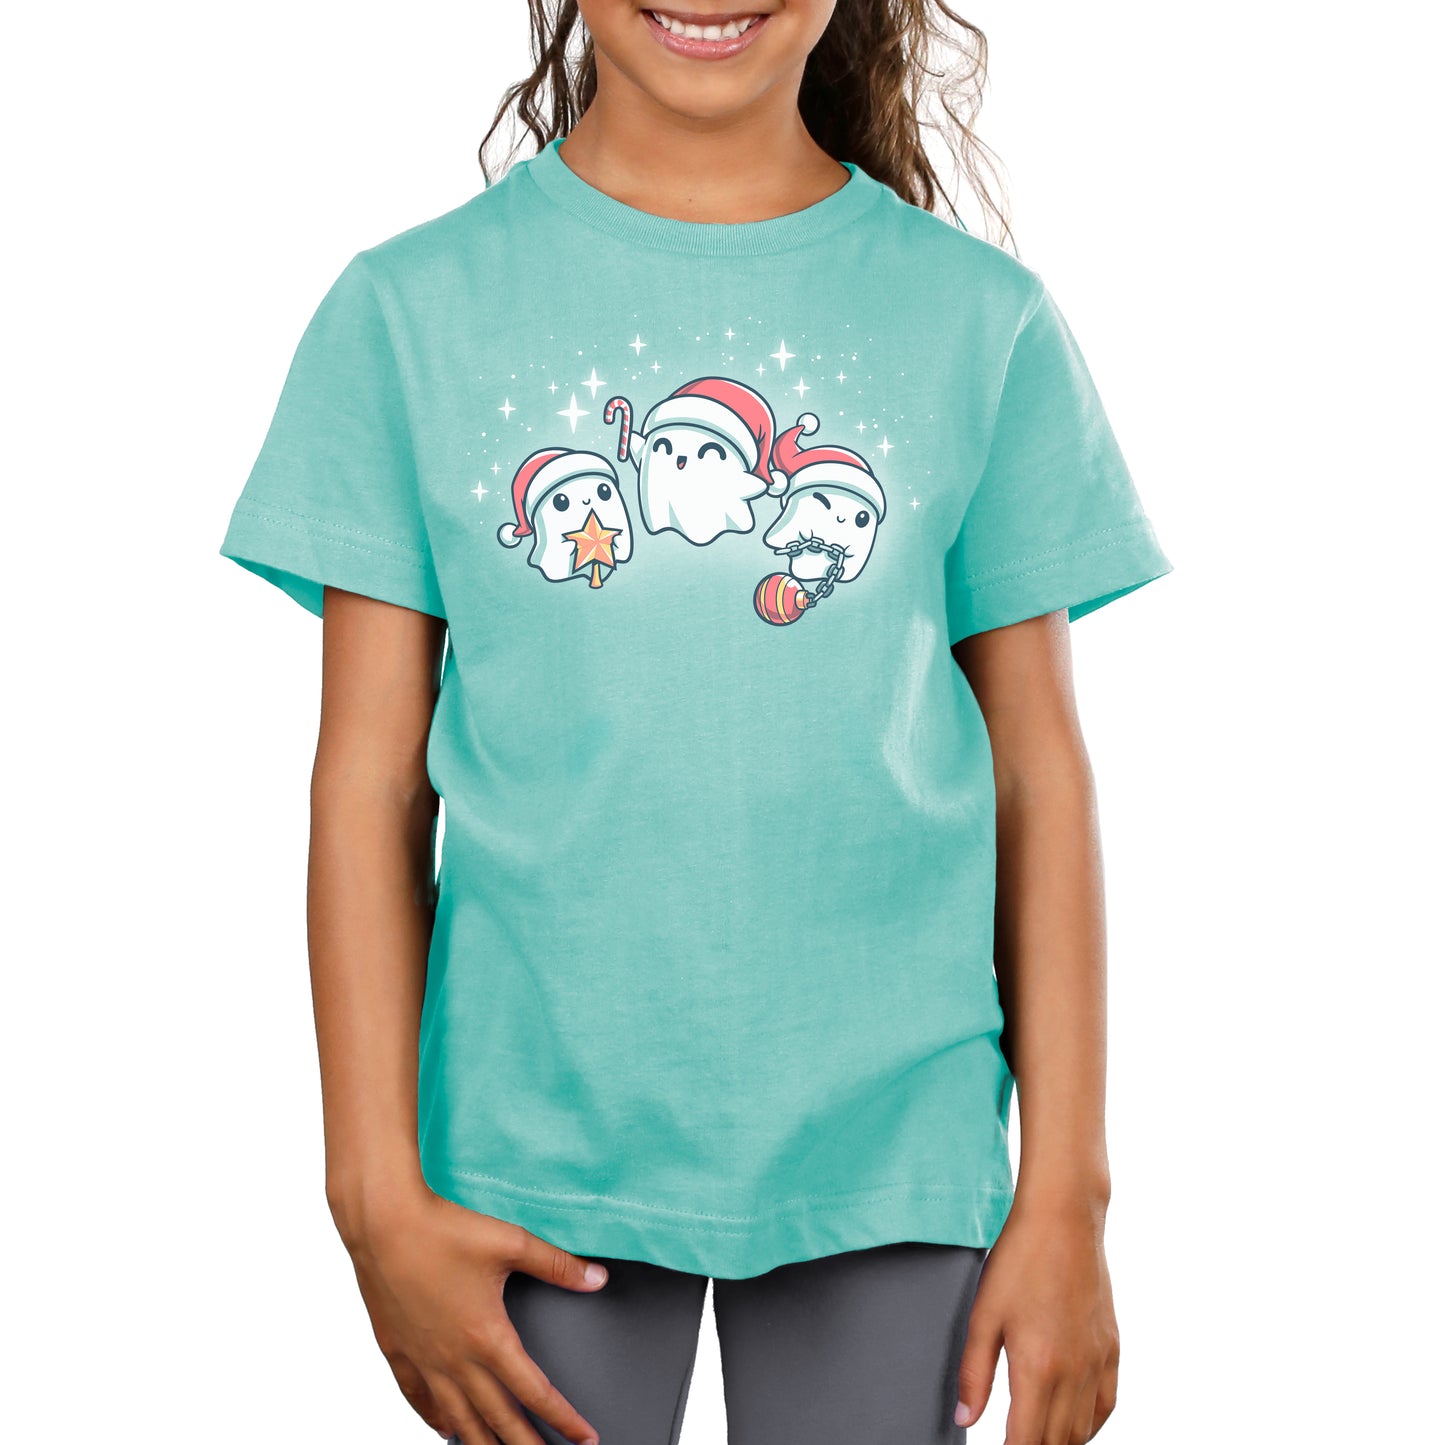 A young girl wearing a TeeTurtle T-shirt with three Santa hats.